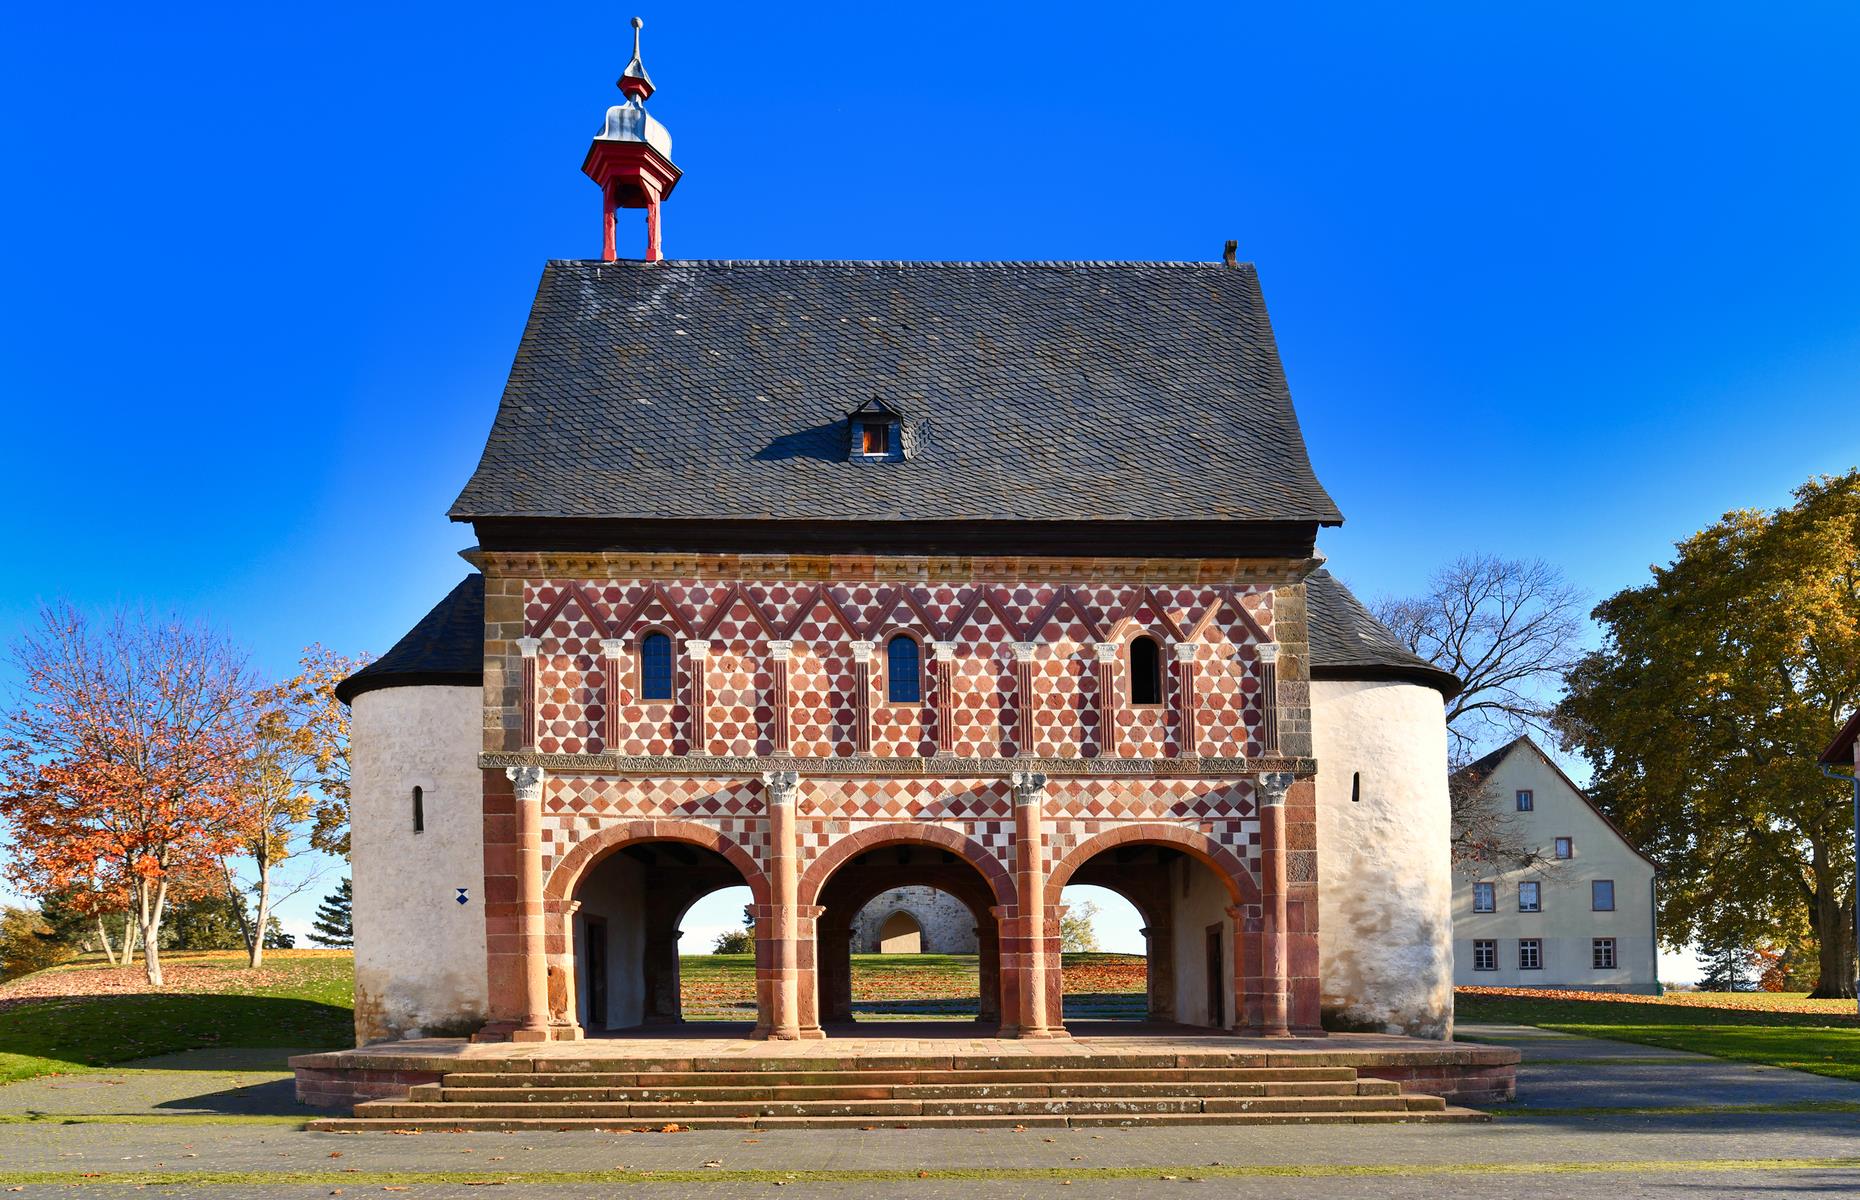 <p>The imposing gatehouse is the standout feature of <a href="http://whc.unesco.org/en/list/515">Lorsch Abbey</a>, a church and monastery founded in 764 and one of the finest surviving monuments from Germany’s early medieval Carolingian Renaissance period. The entryway is more than 1,200 years old yet wears its age remarkably well, with its archways, turrets and pitched roof impeccably preserved. Though other parts of the site have been ravaged by time and fire damage, much remains intact as a chronicler of monastic life.</p>